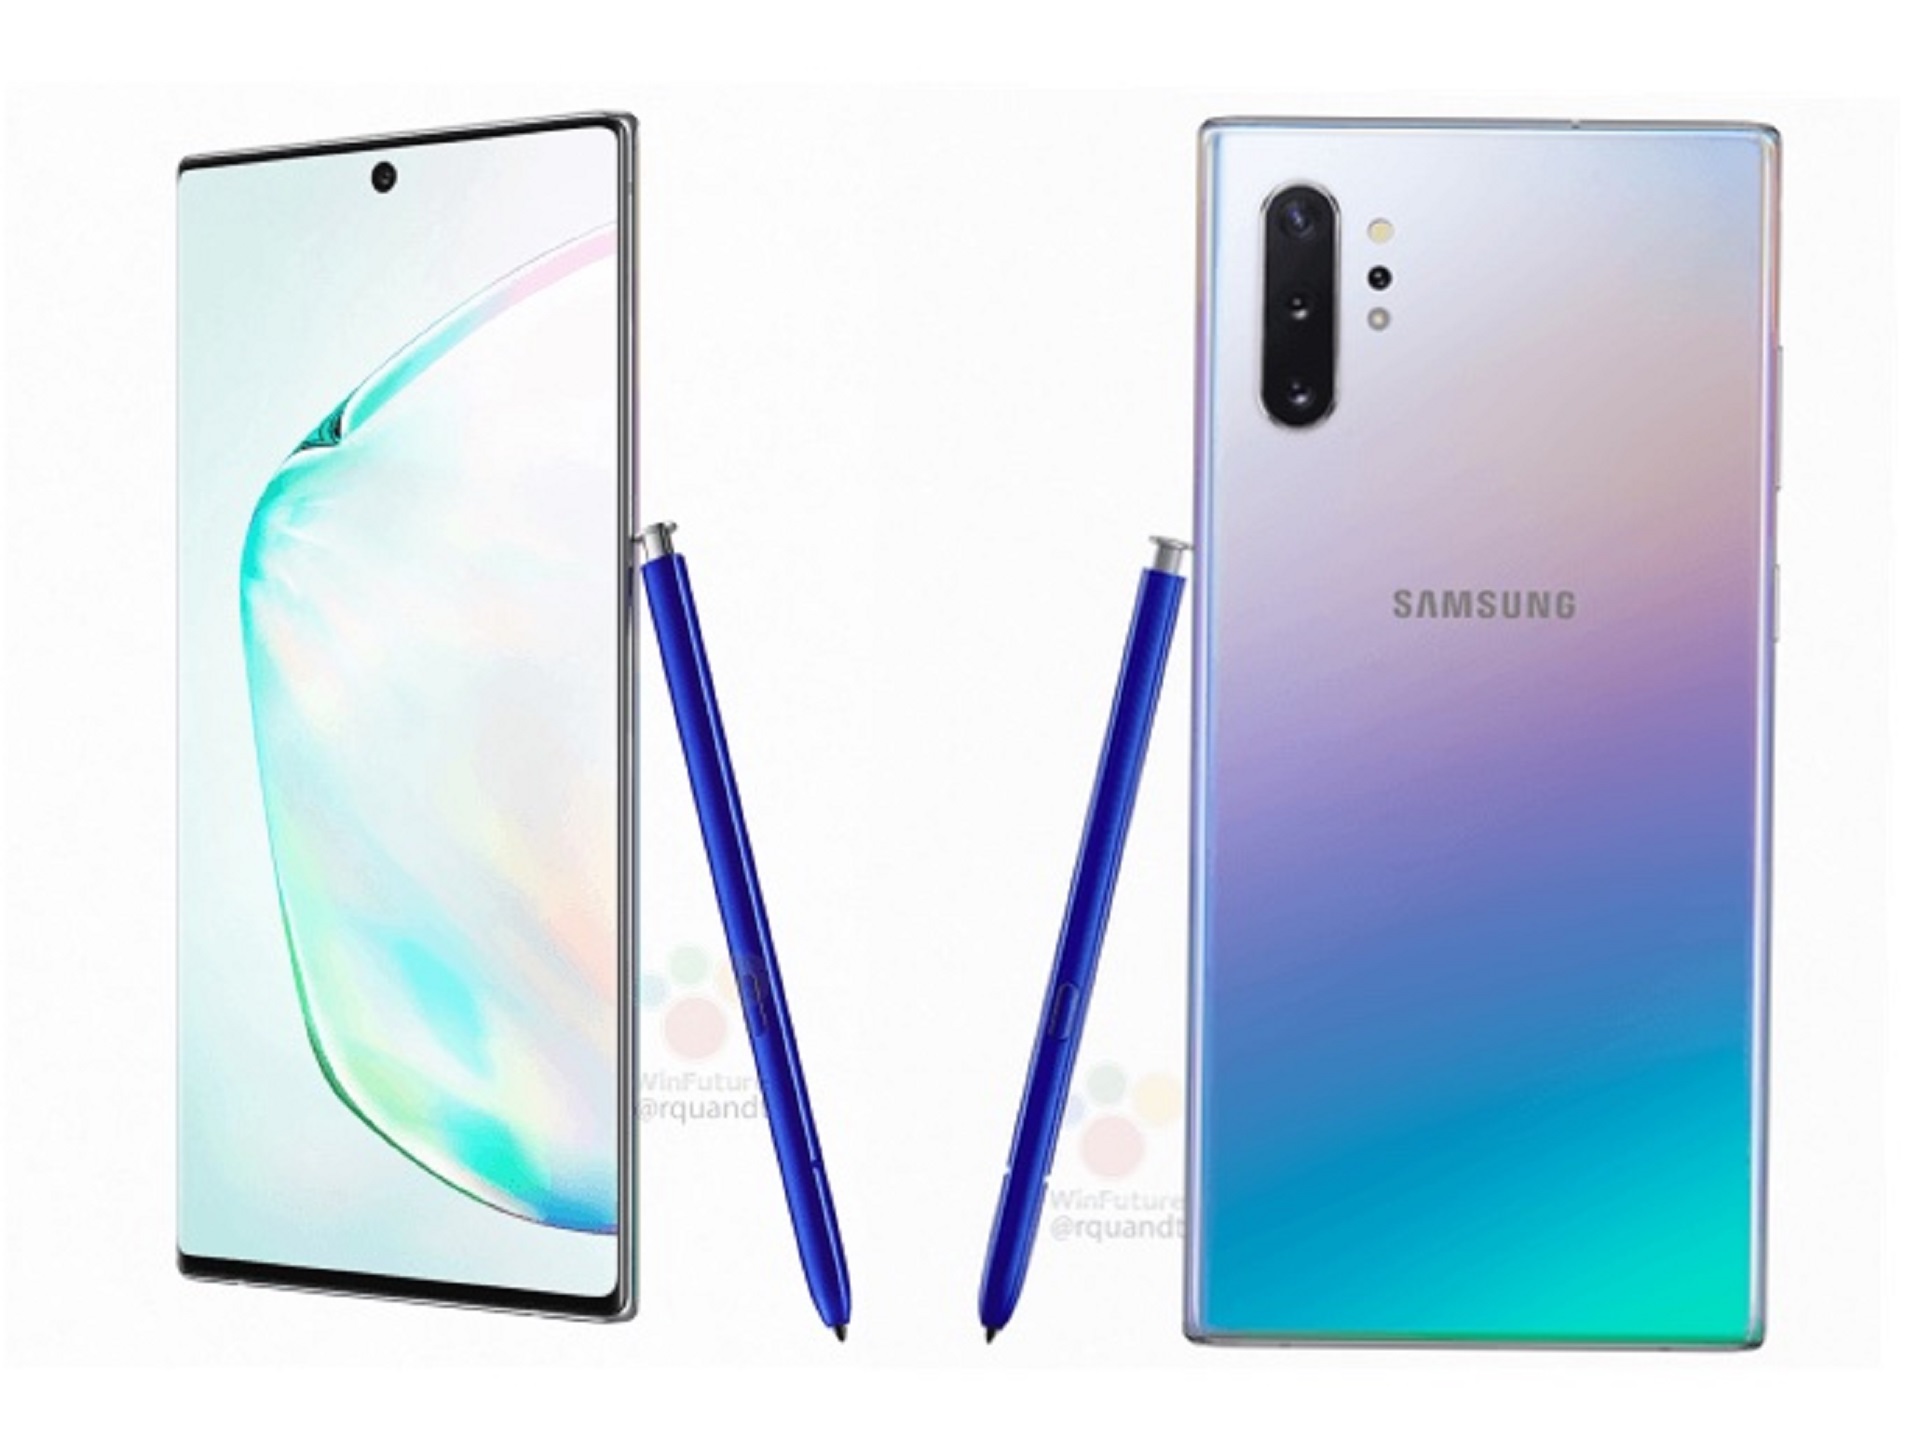 Samsung note s10. Самсунг галакси ноут 10 плюс. Galaxy Note 10 Plus. Samsung Note 10. Samsung Galaxy Note 10 Lite.